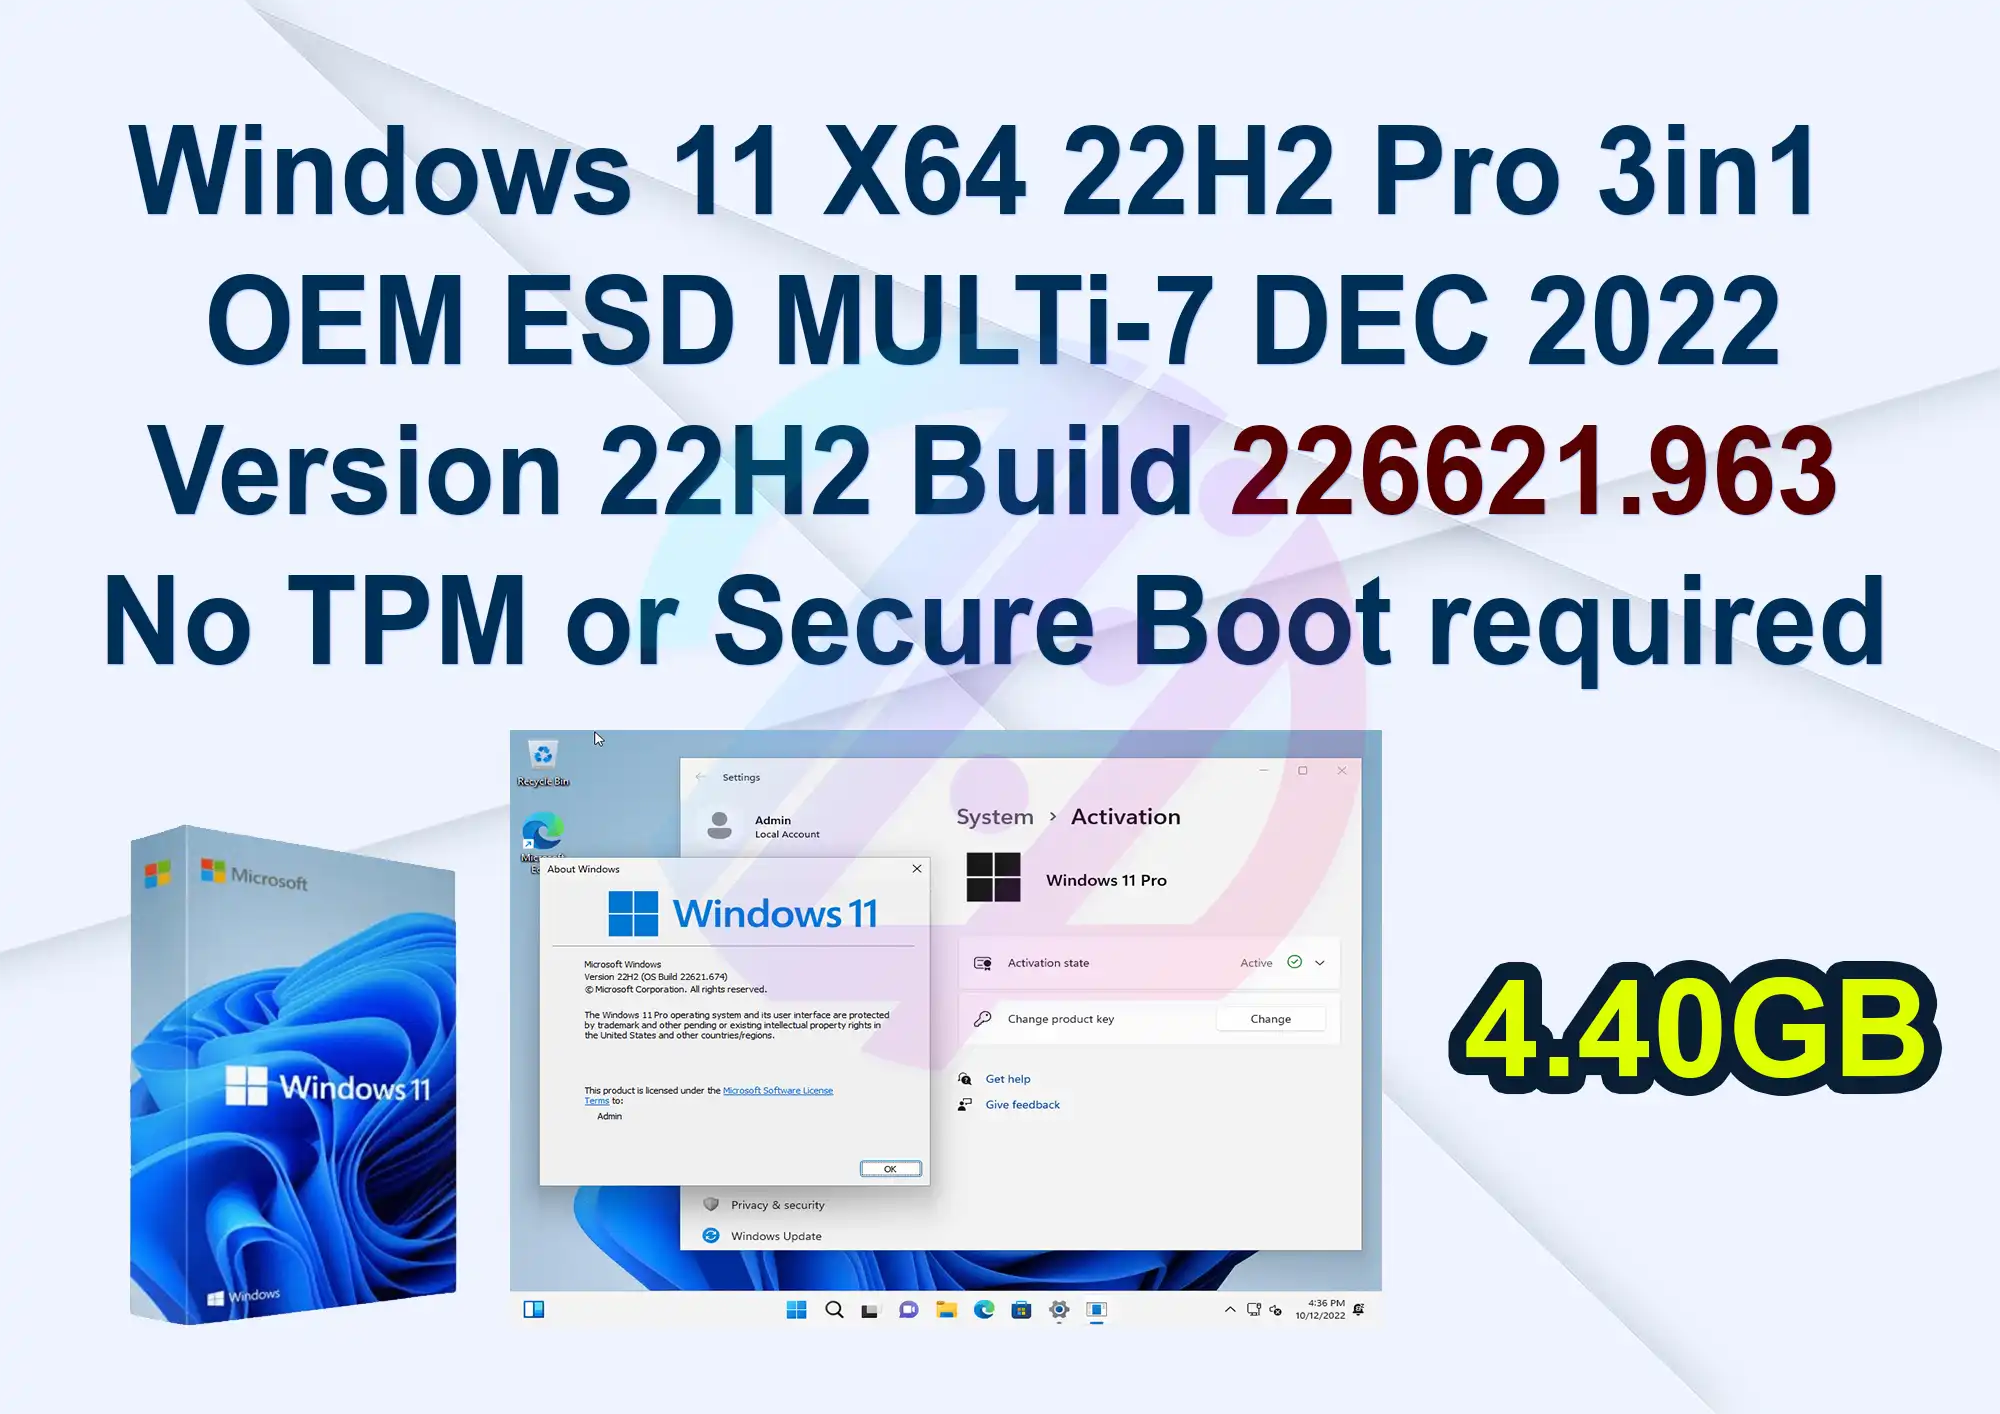 Windows 11 X64 22H2 Pro 3in1 OEM ESD MULTi-7 DEC 2022 Version 22H2 Build 226621.963 No TPM or Secure Boot required